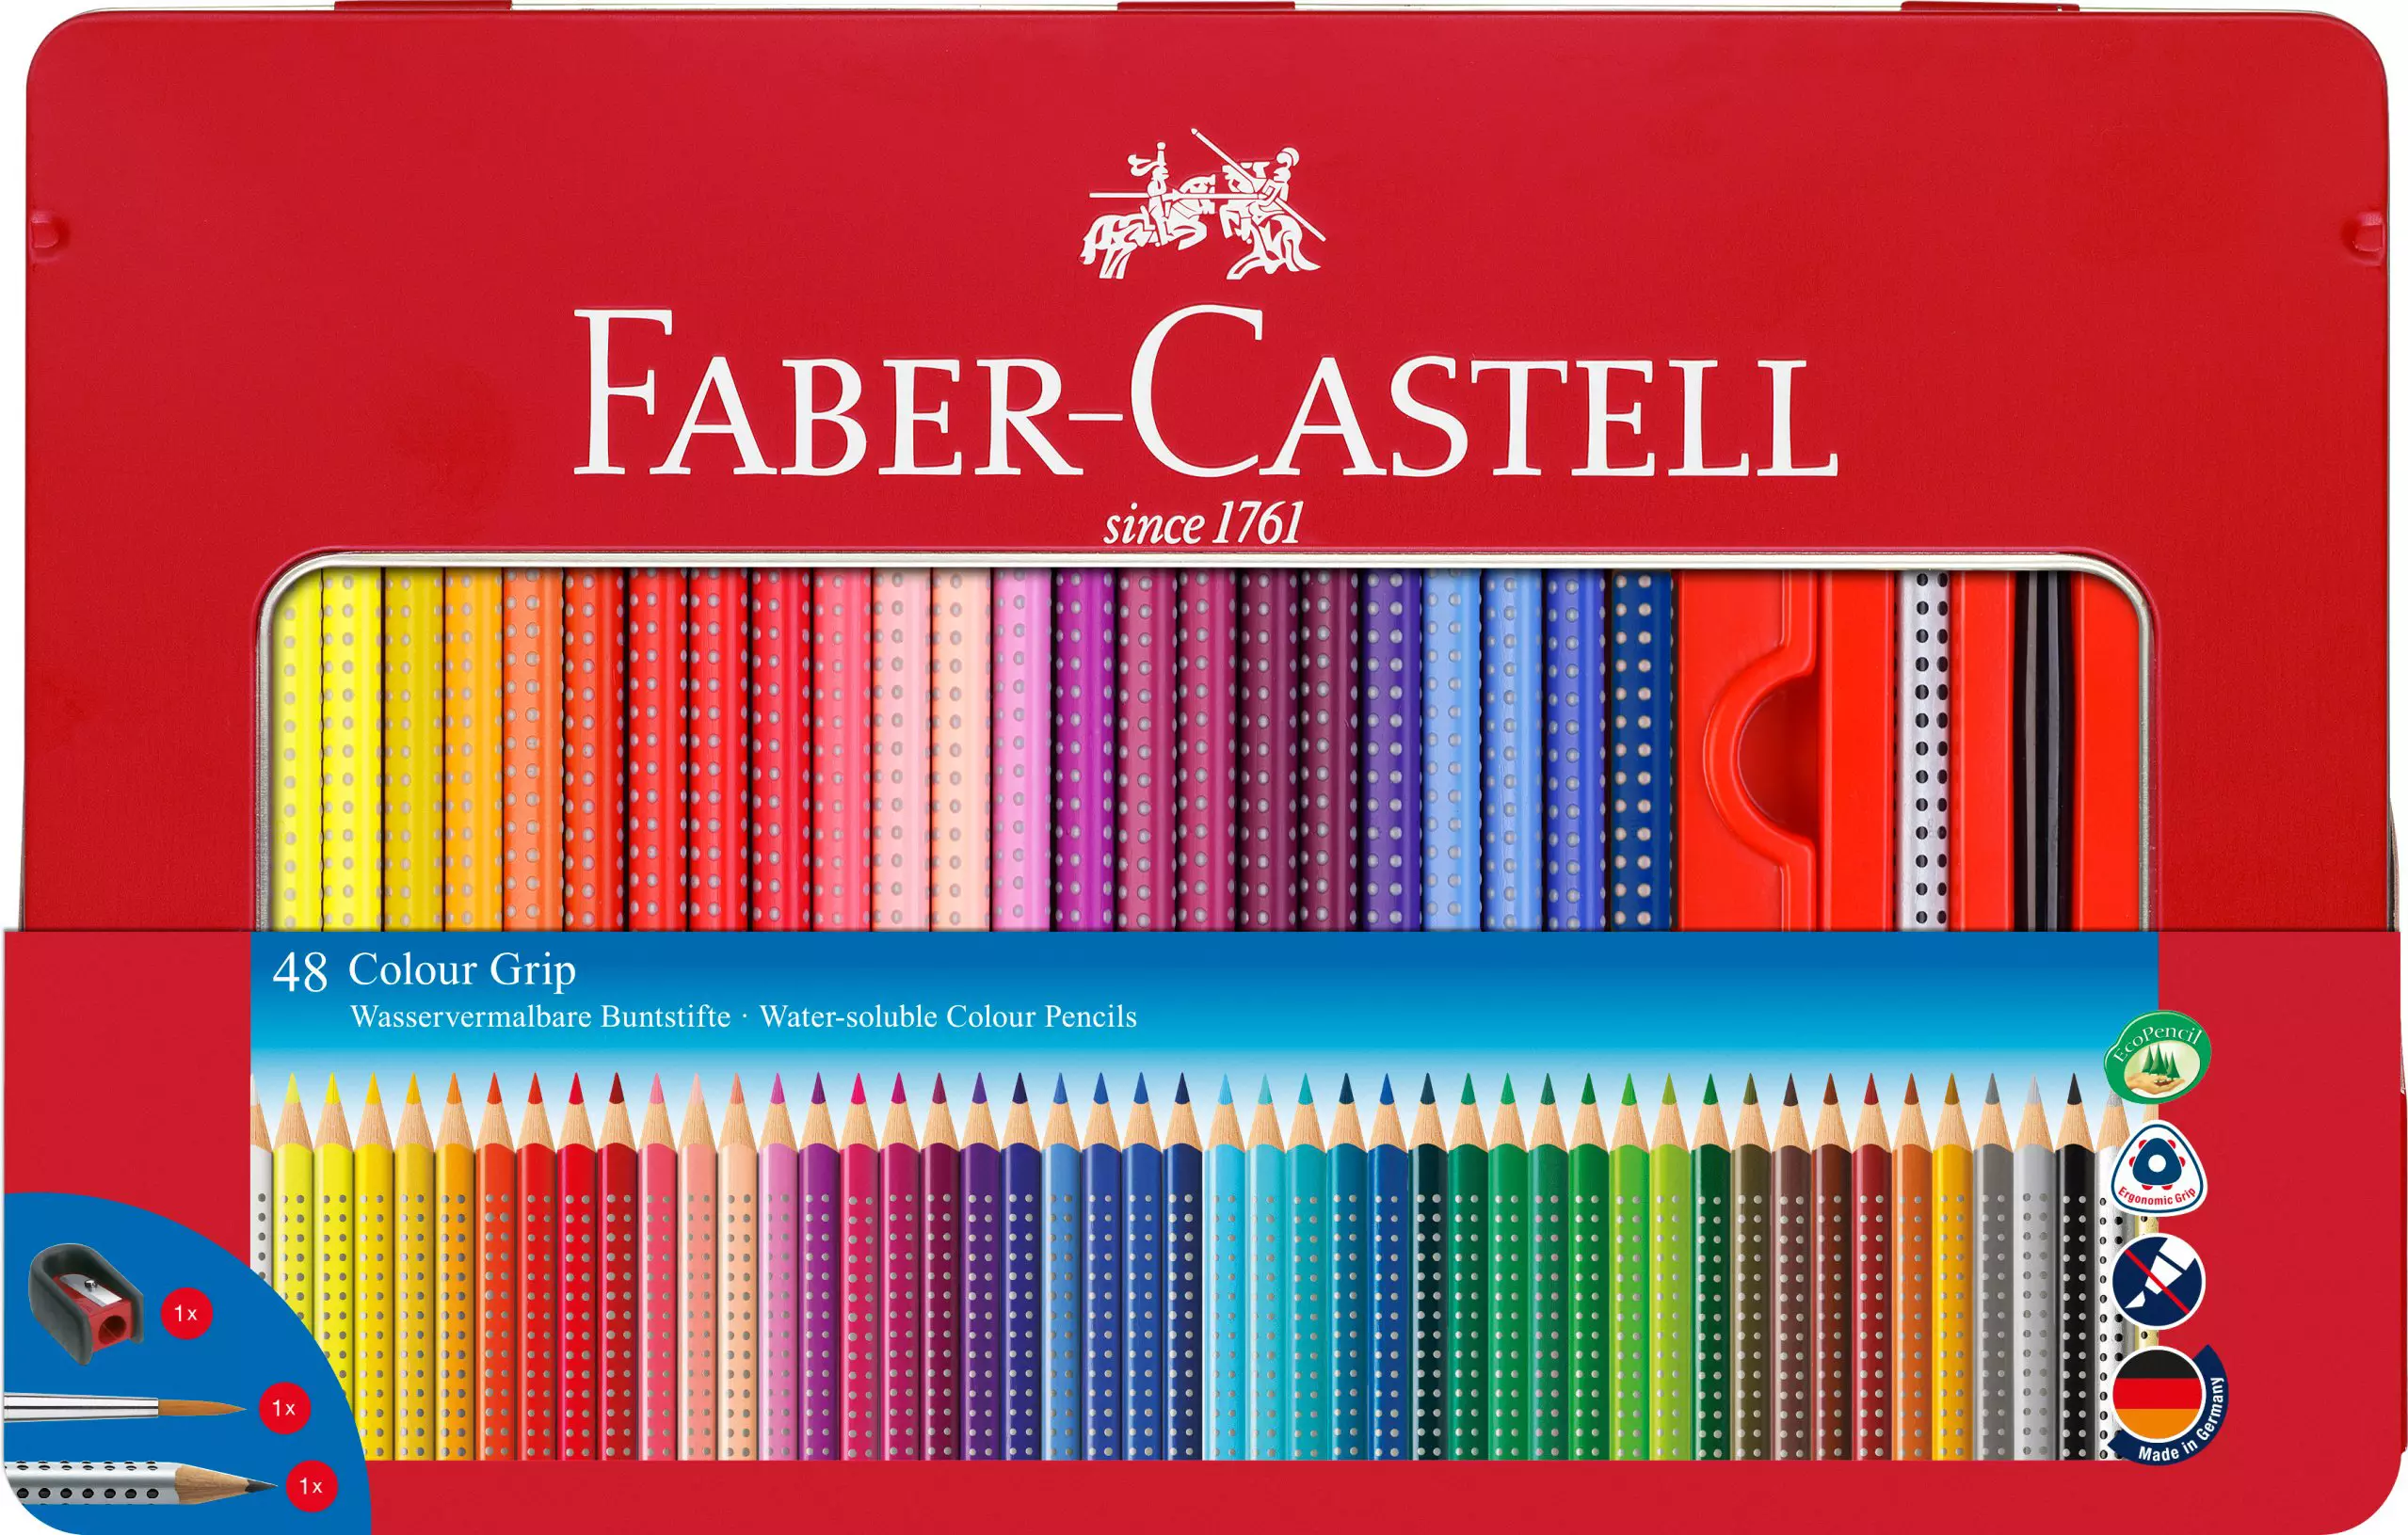 Faber-Castell Colour Pencils Metal Tin With